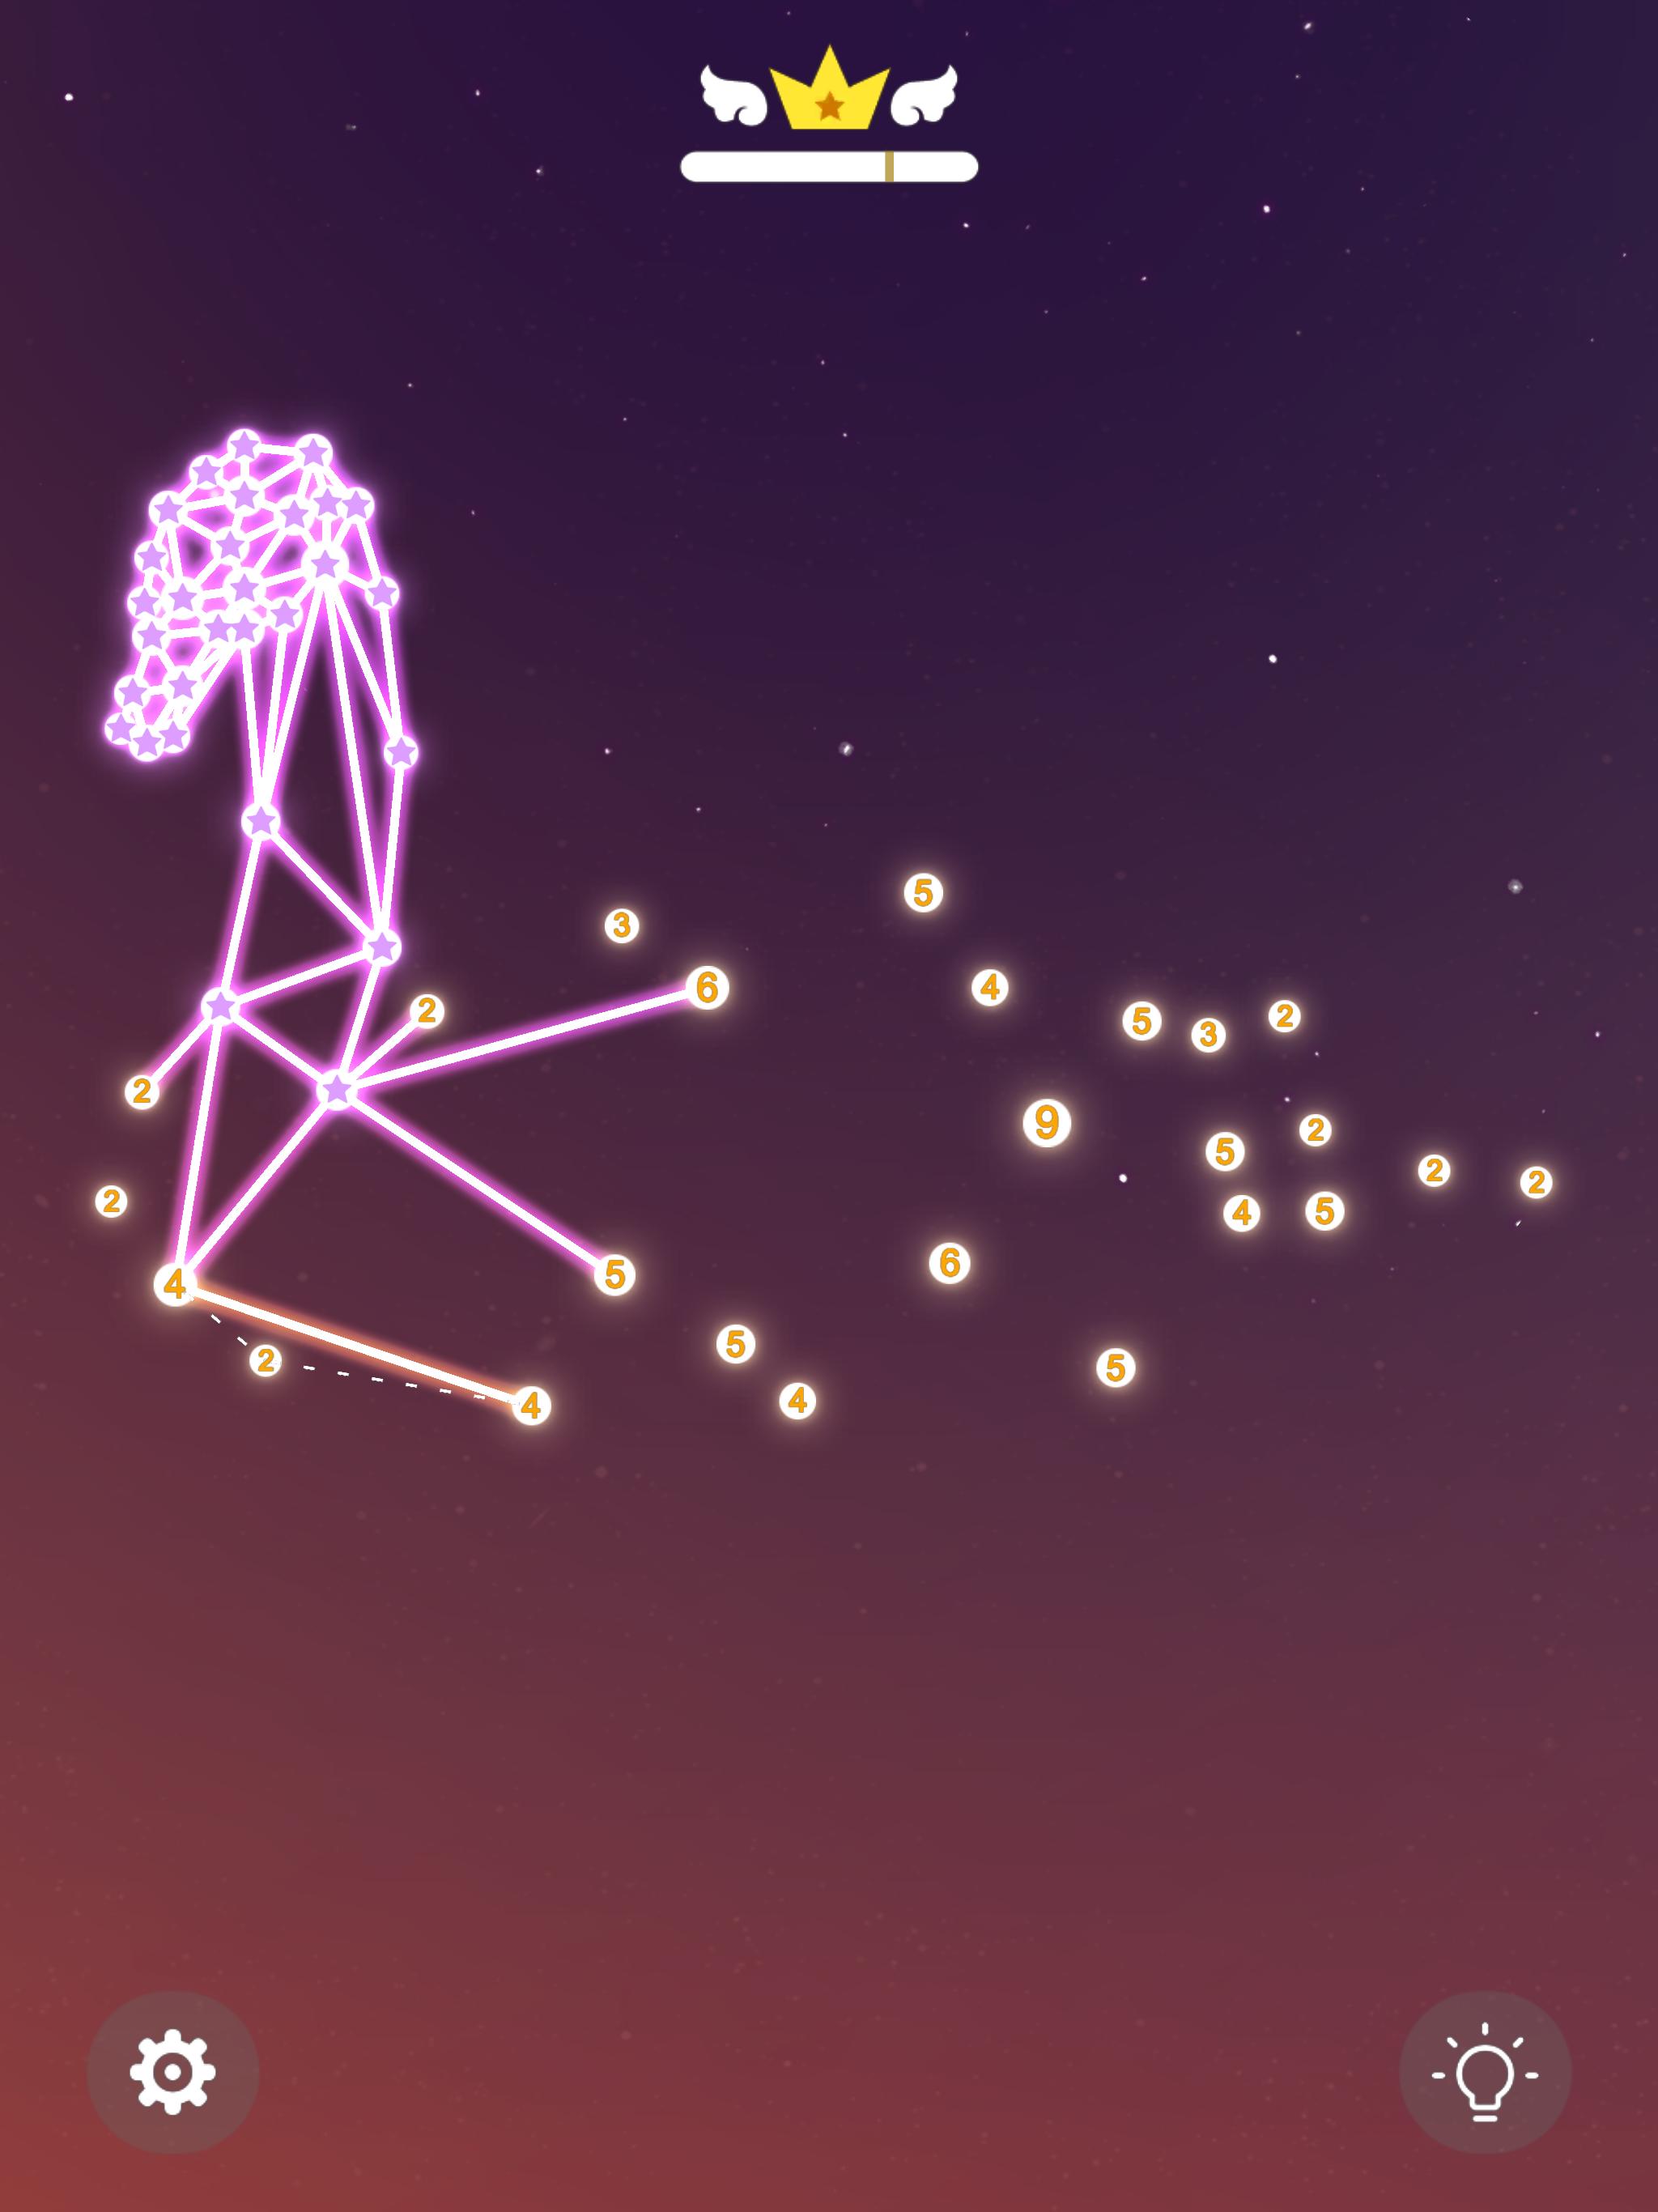 Linepoly Puzzle - Constellation games 1.2.3 Screenshot 12